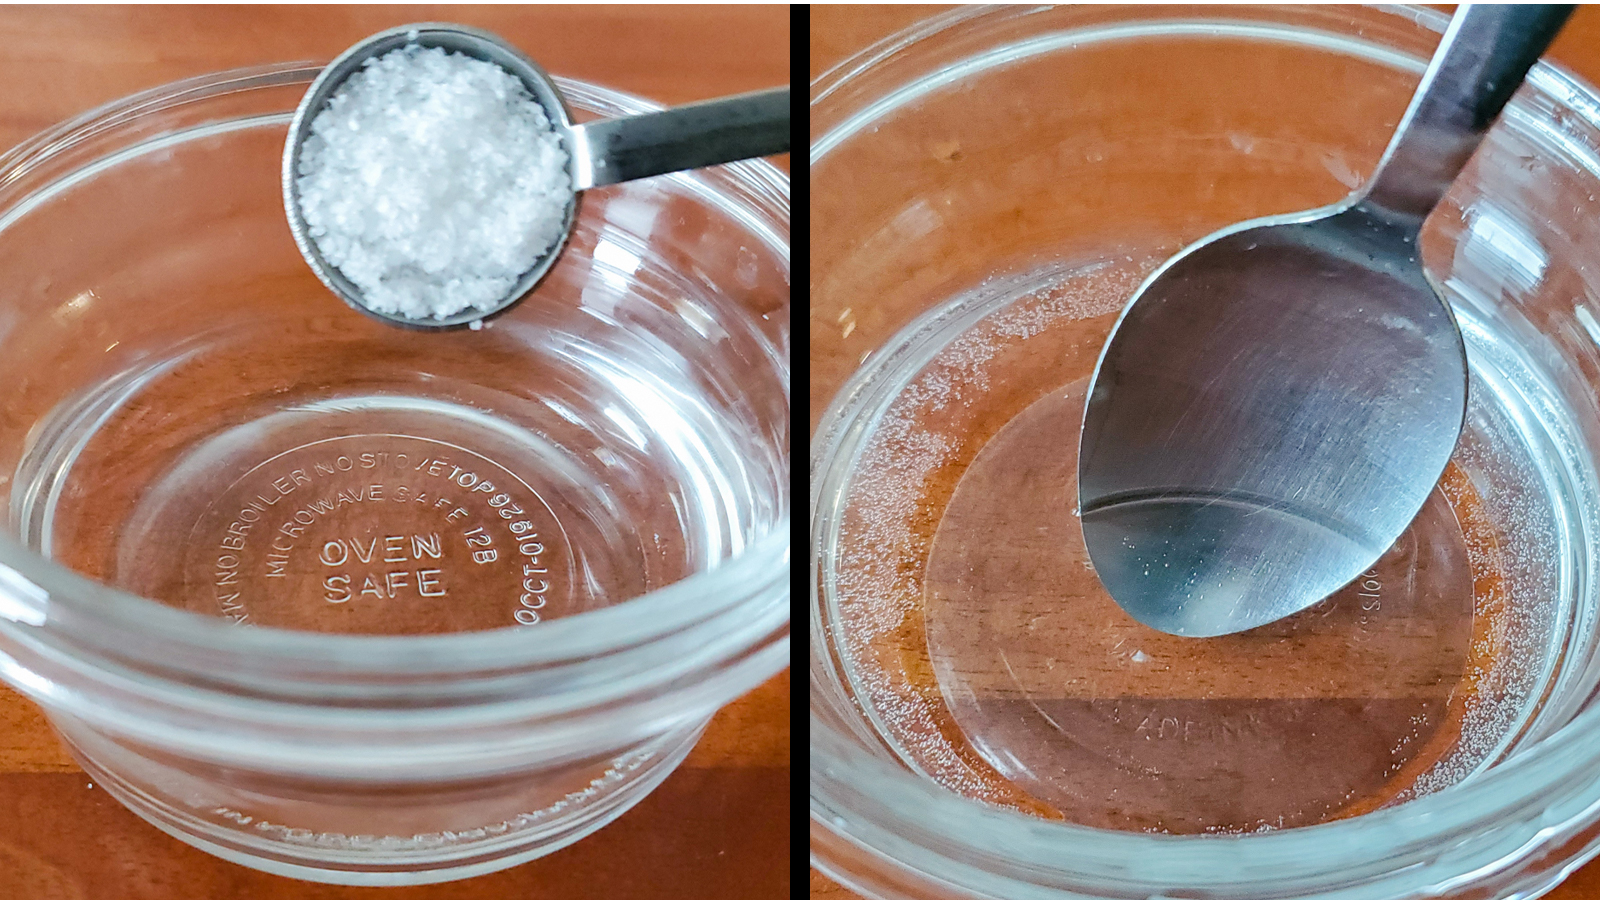 Side-by-side images show a person adding salt to water and stirring it to desolve the salt.